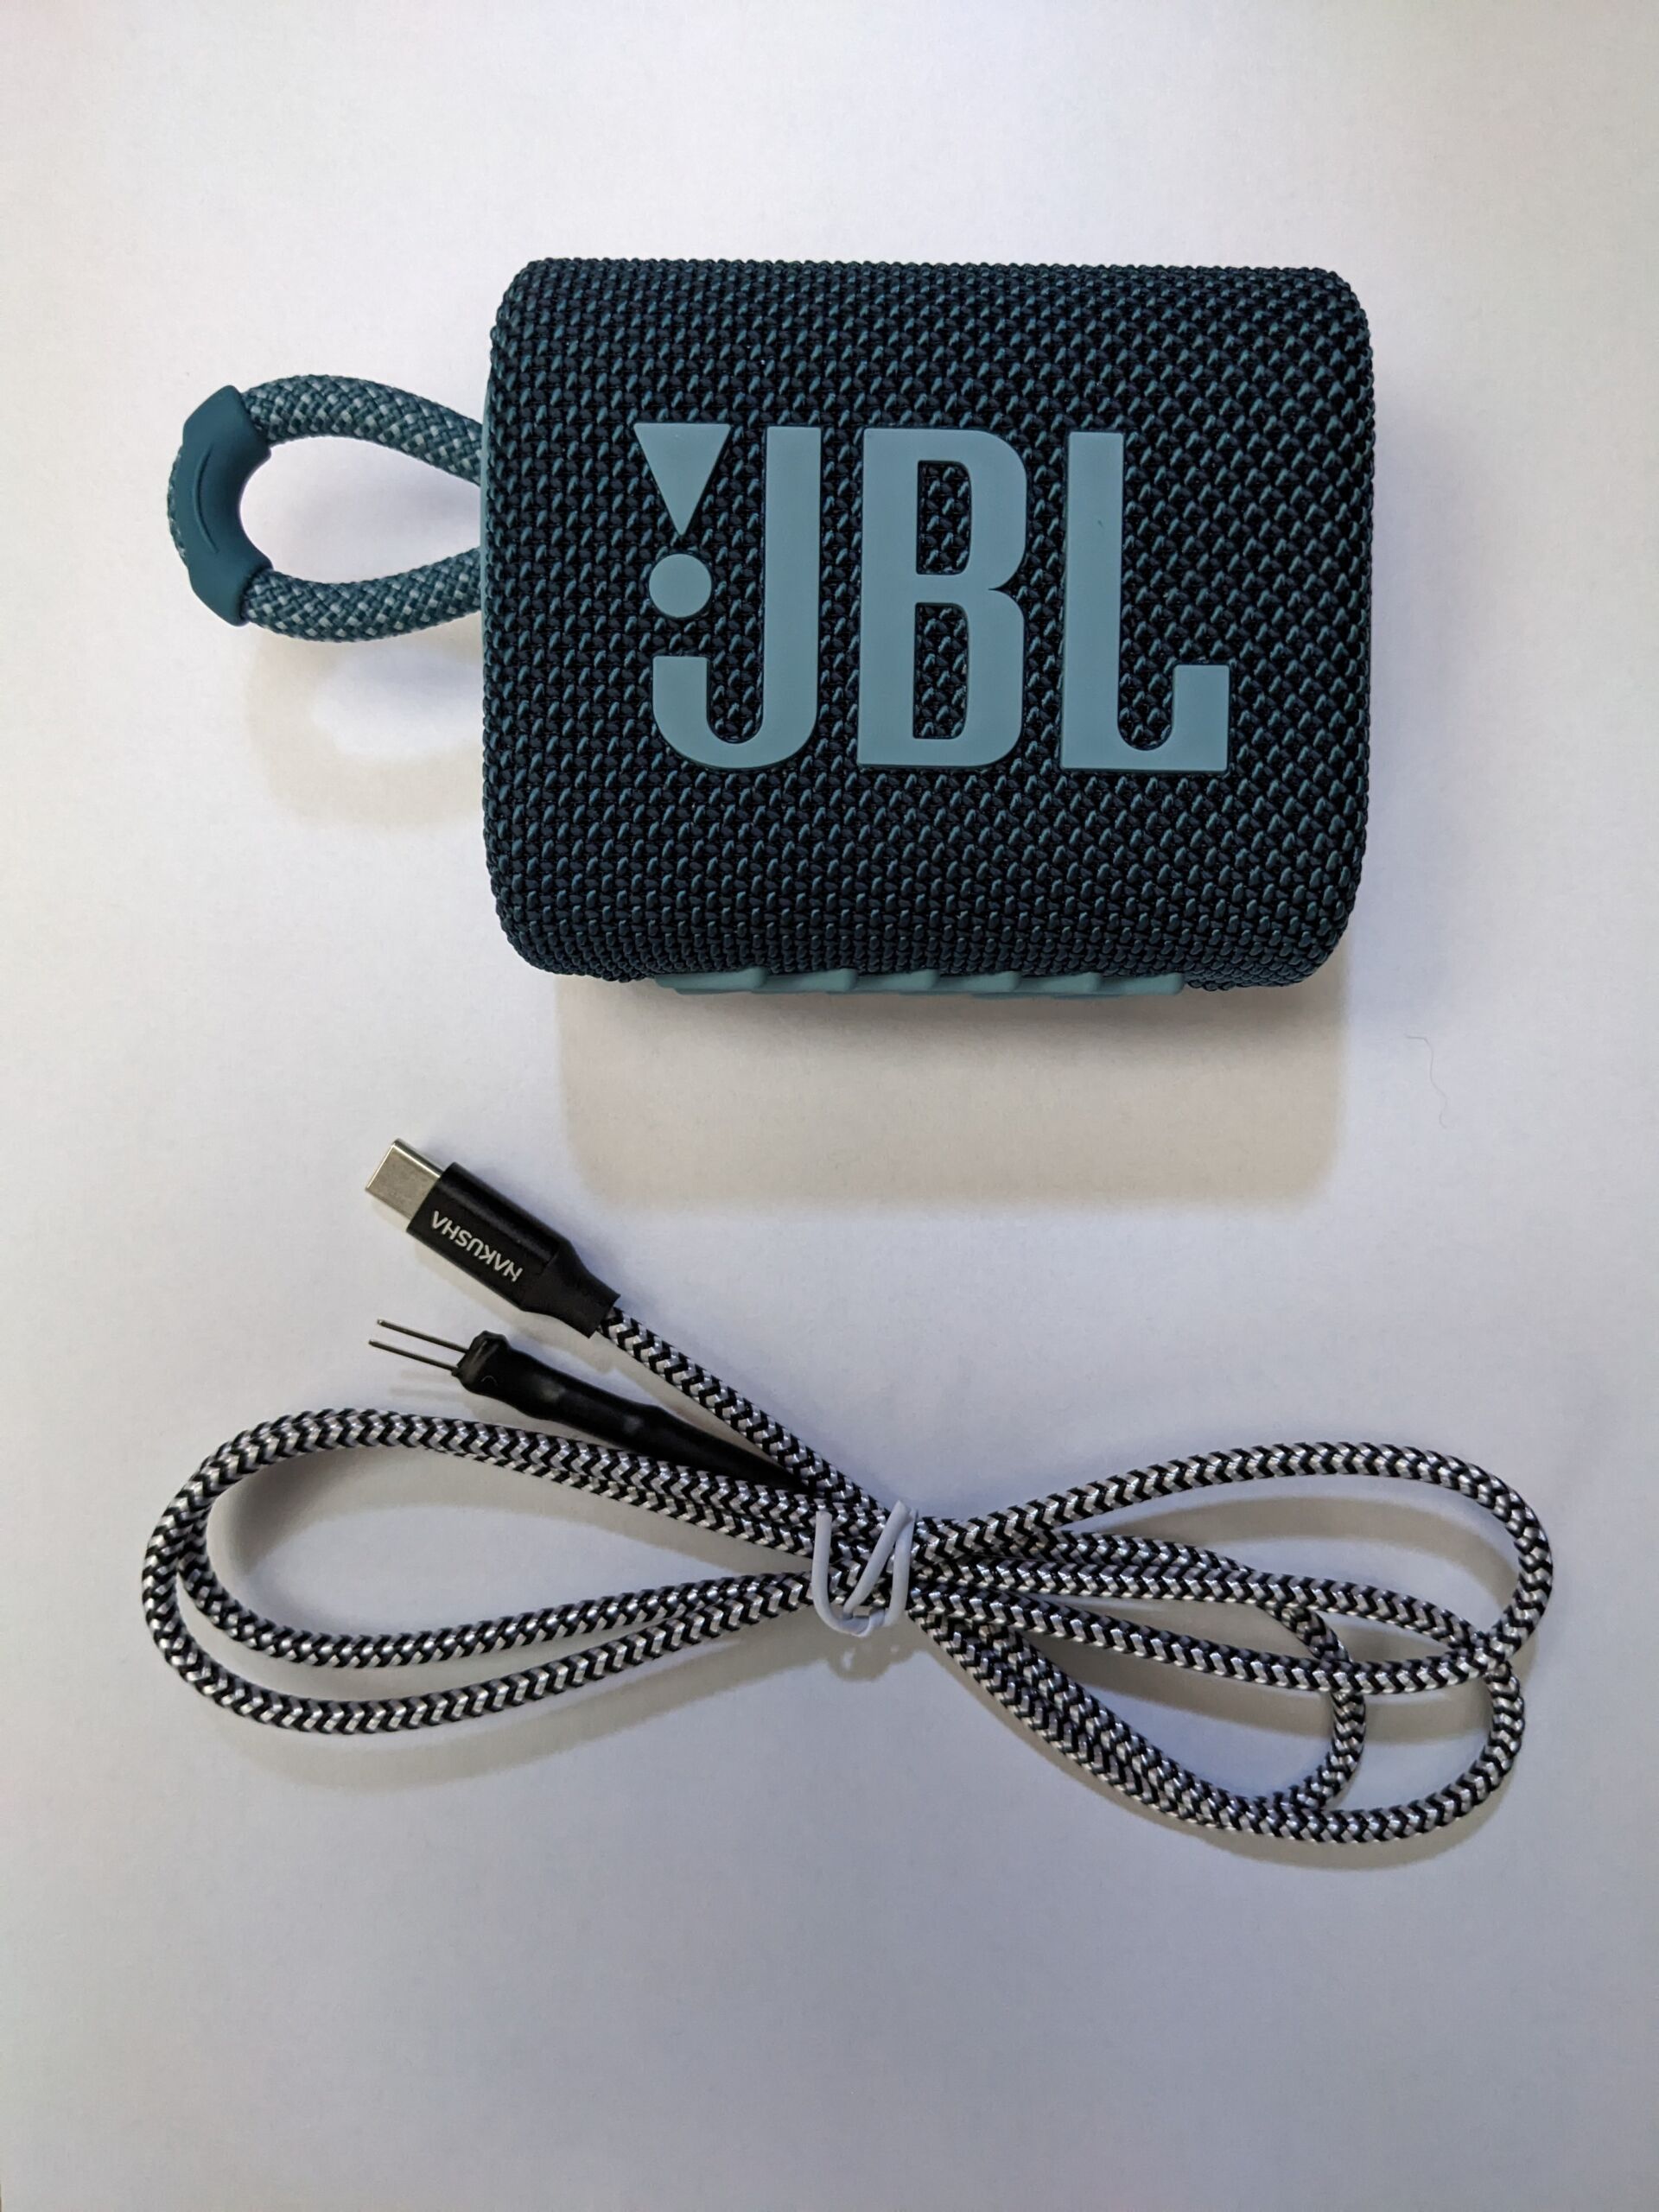 A CAN injector disguised as a JBL speaker.